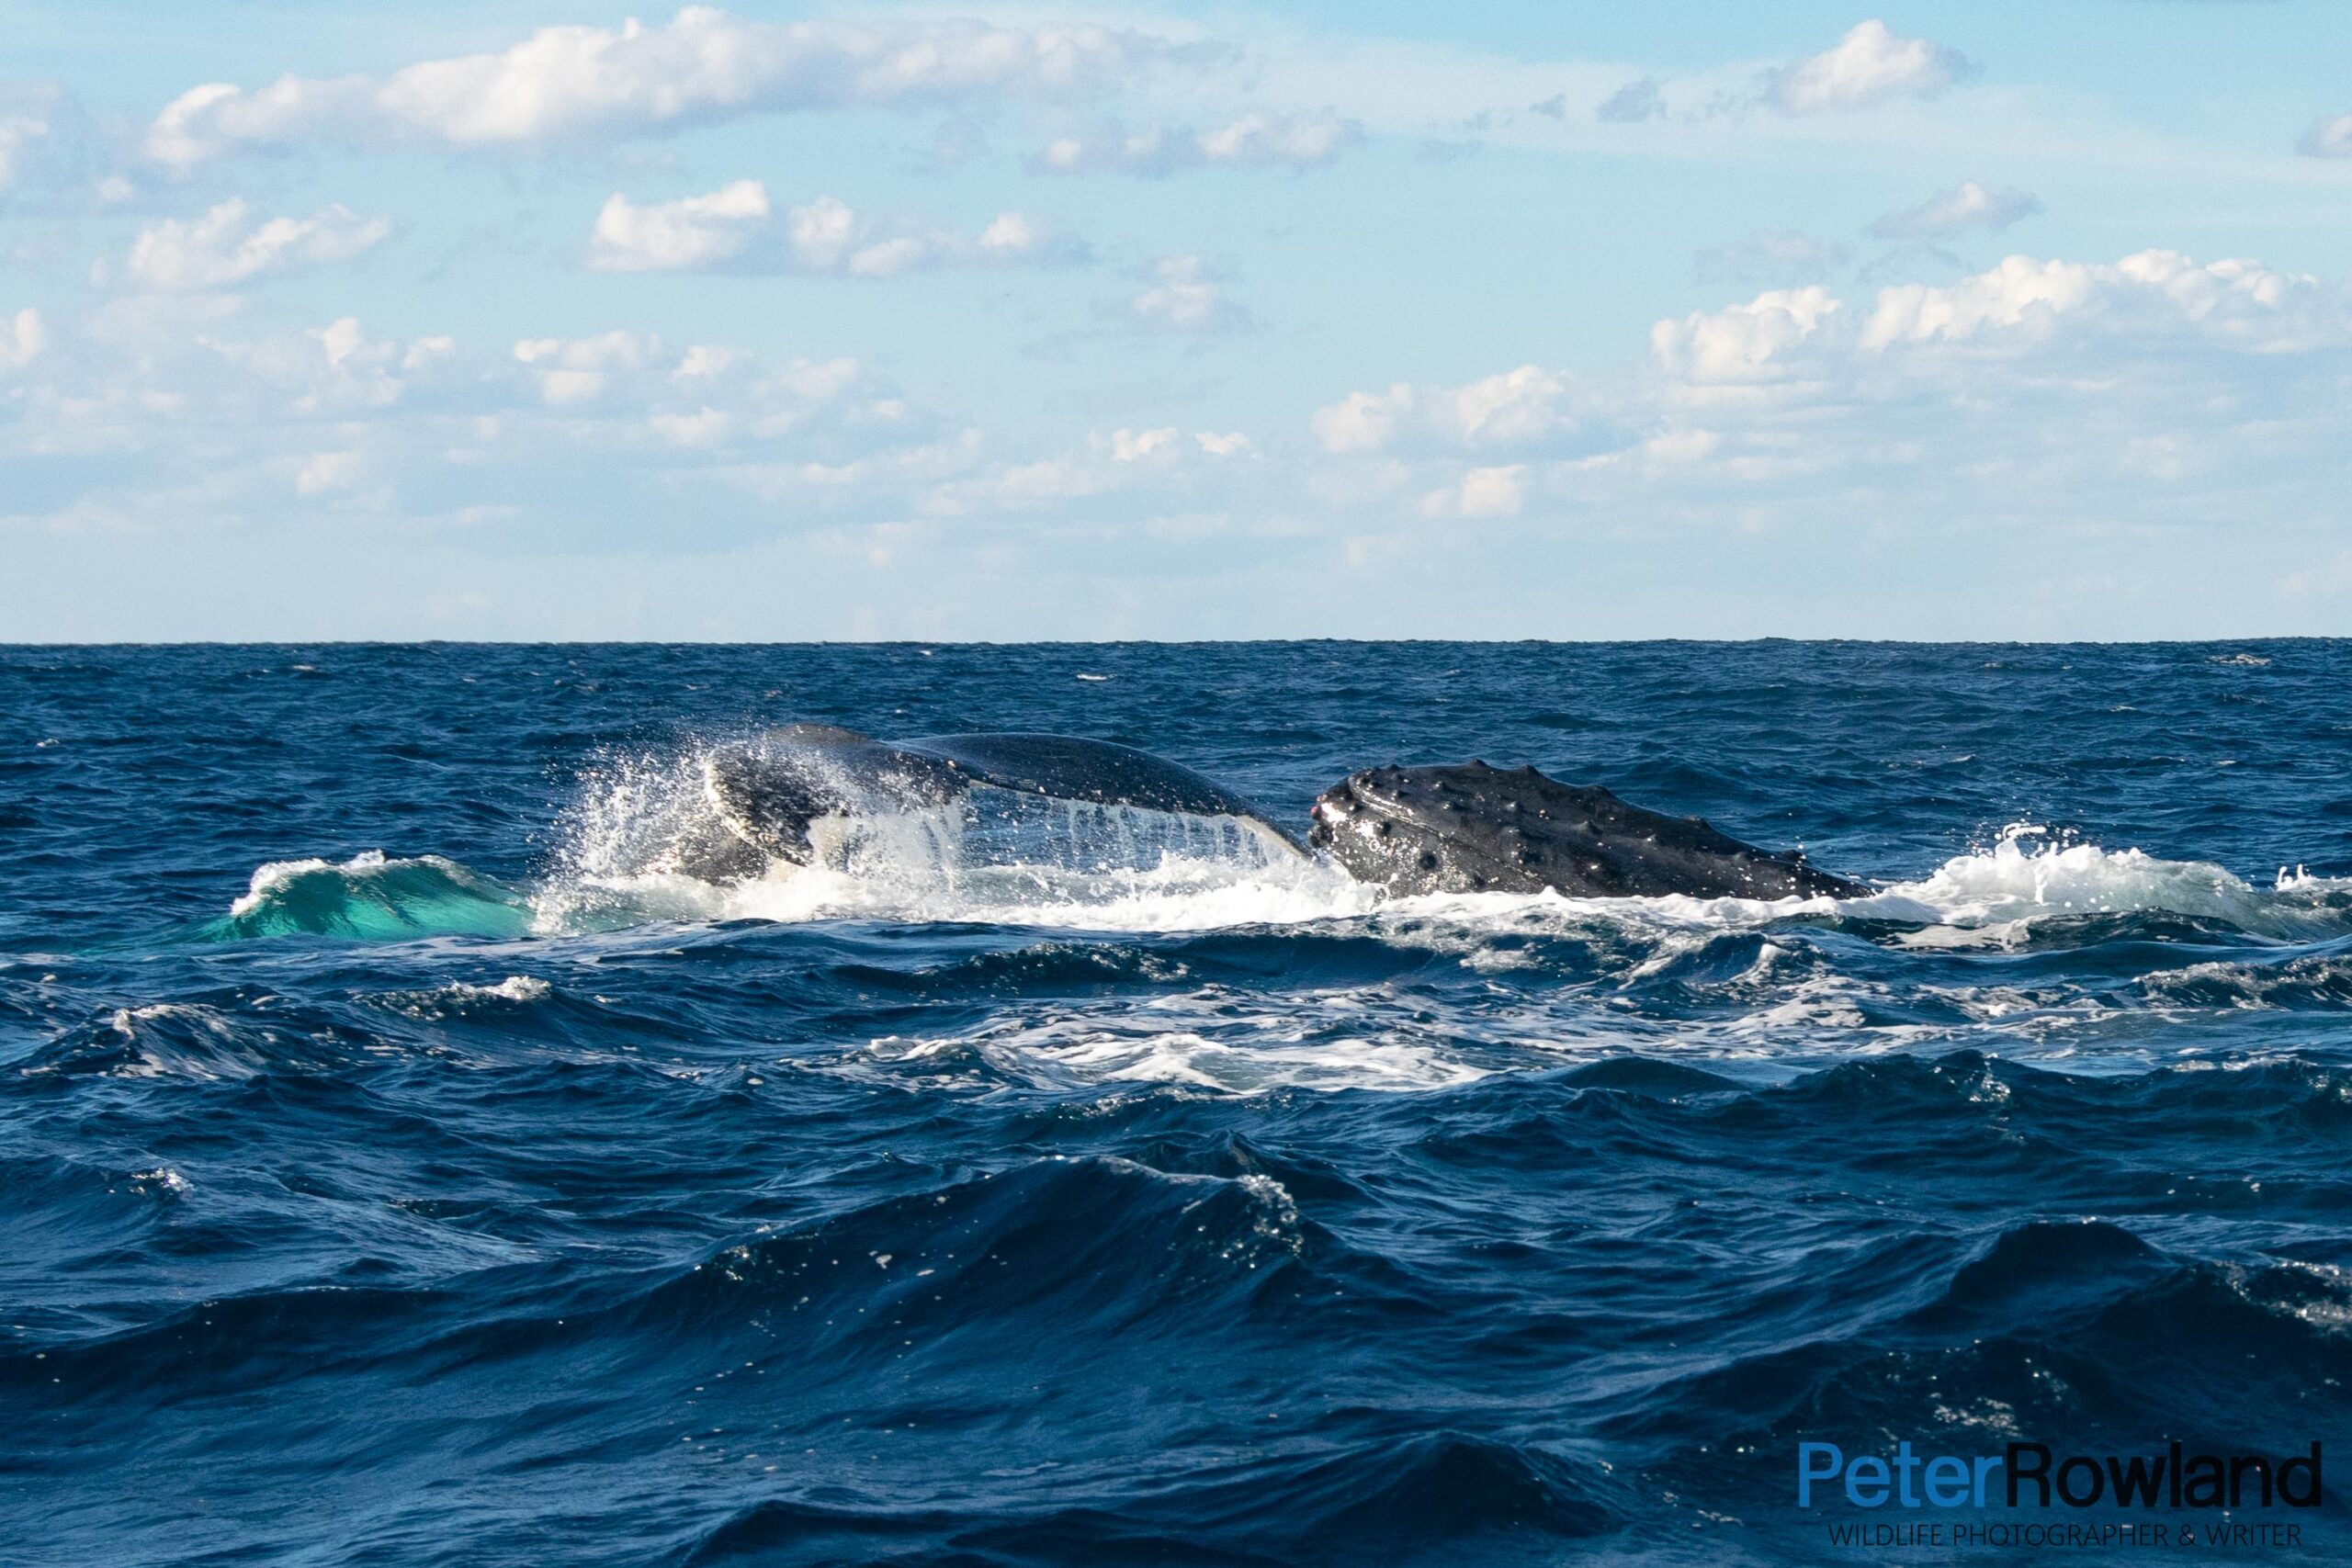 A pod of Humpback Whales migrating northwards along the east coast of Australia